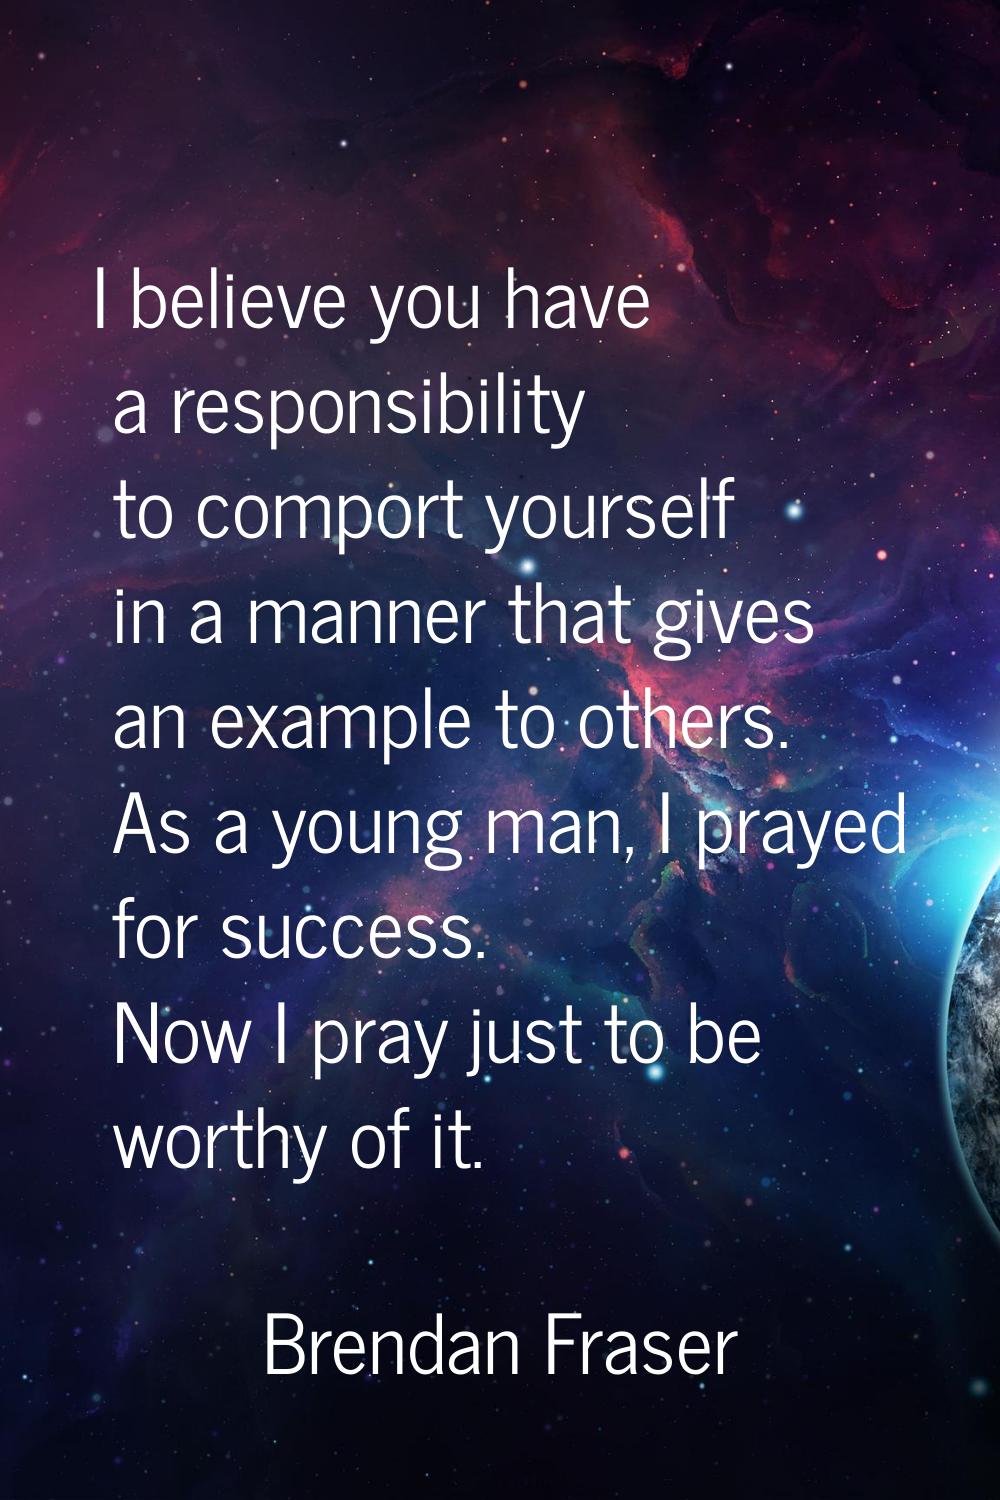 I believe you have a responsibility to comport yourself in a manner that gives an example to others